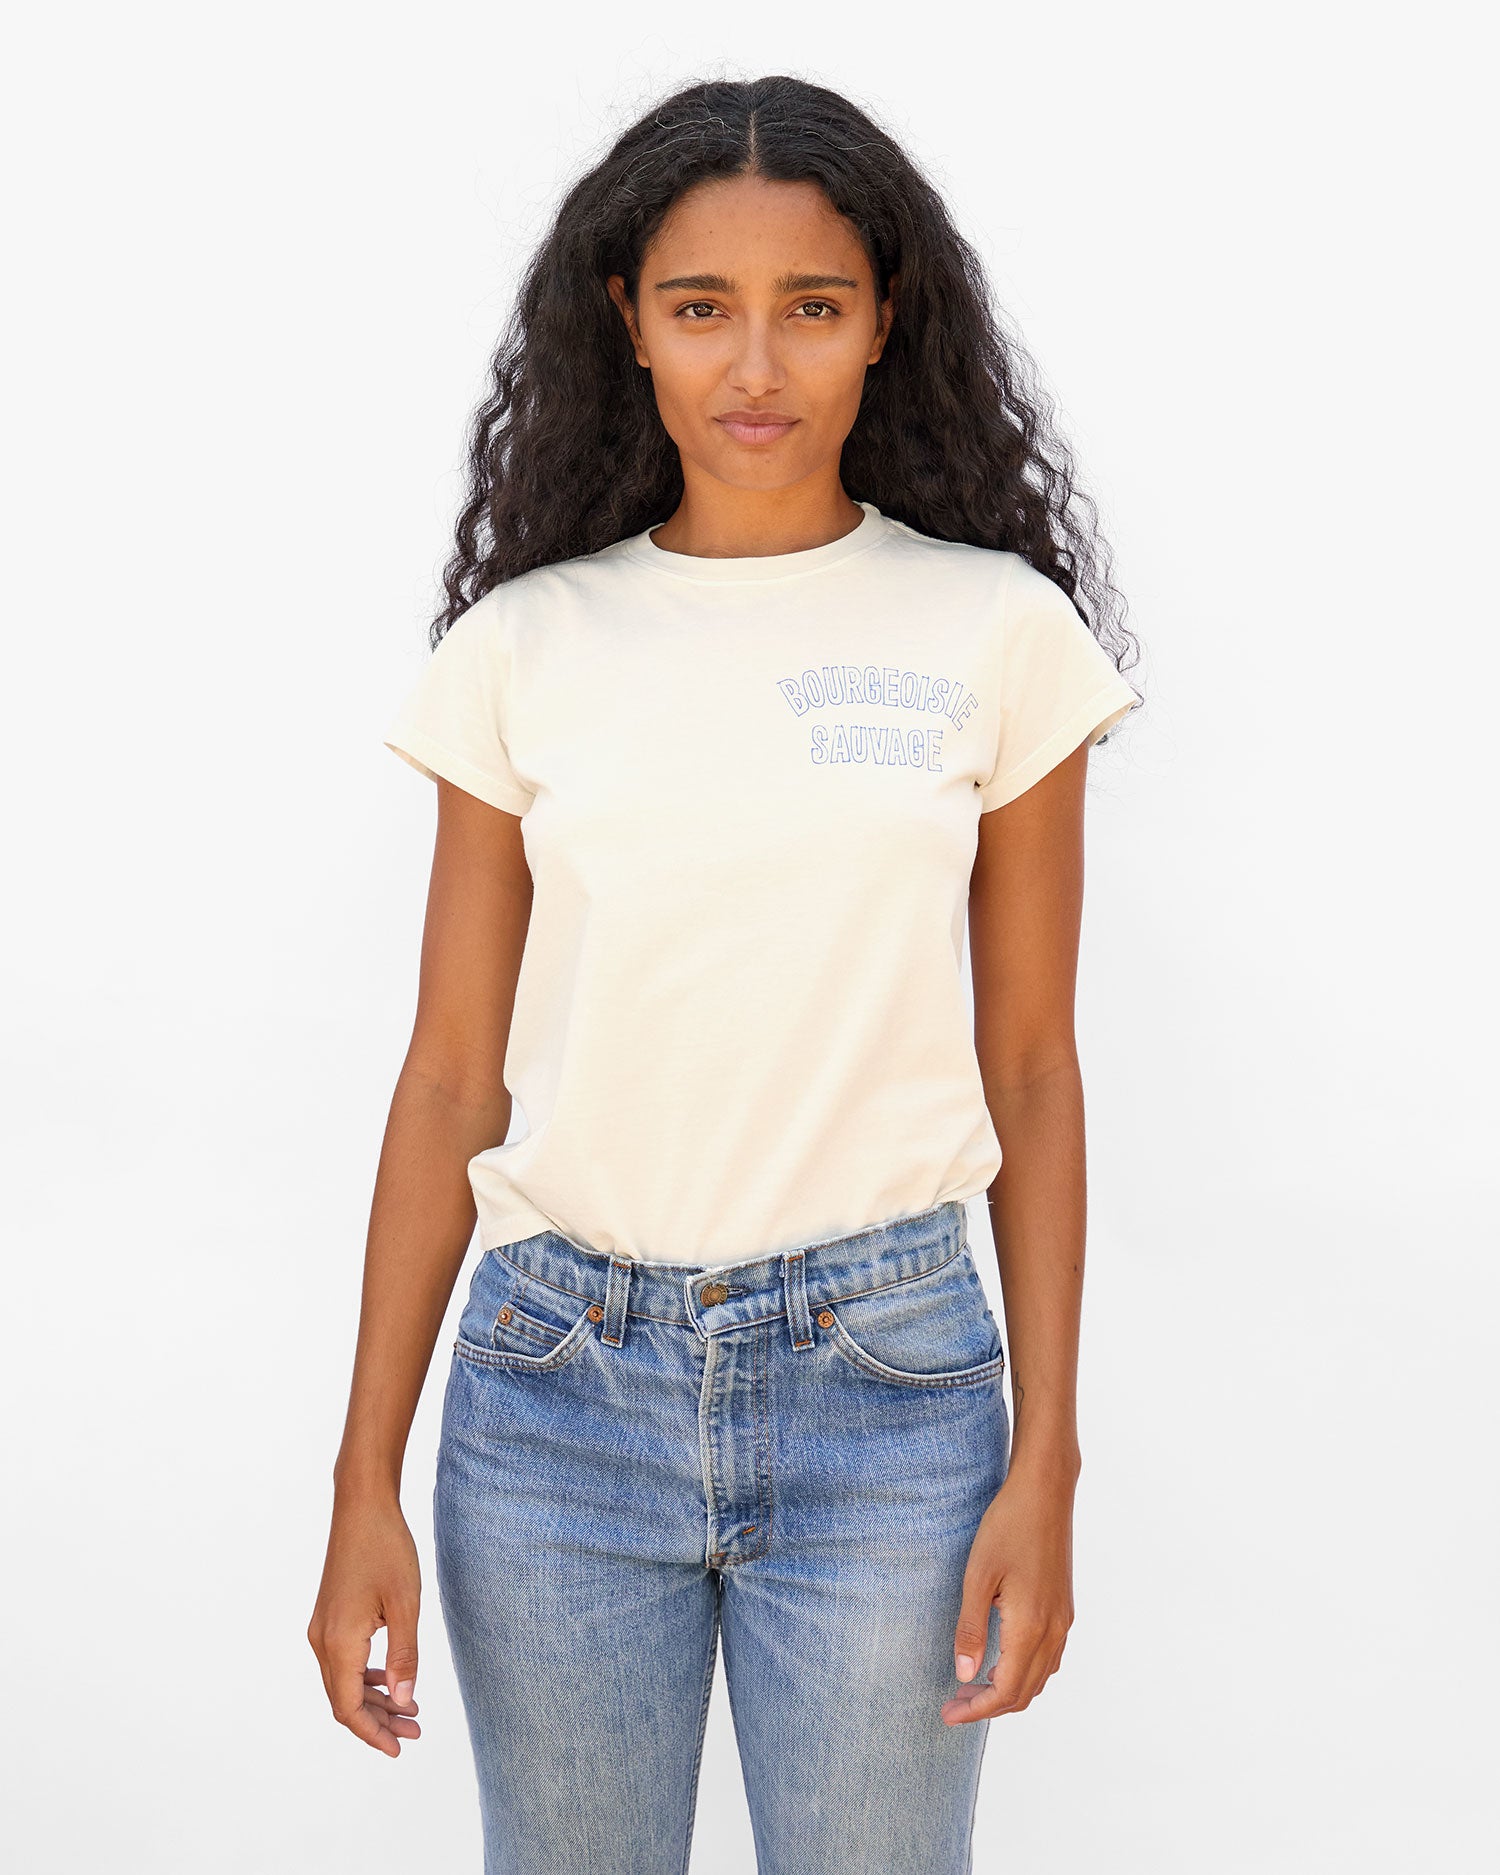 Jade standing with her arms at her sides wearing the Cream Bourgeoisie Sauvage Classic Tee and jeans